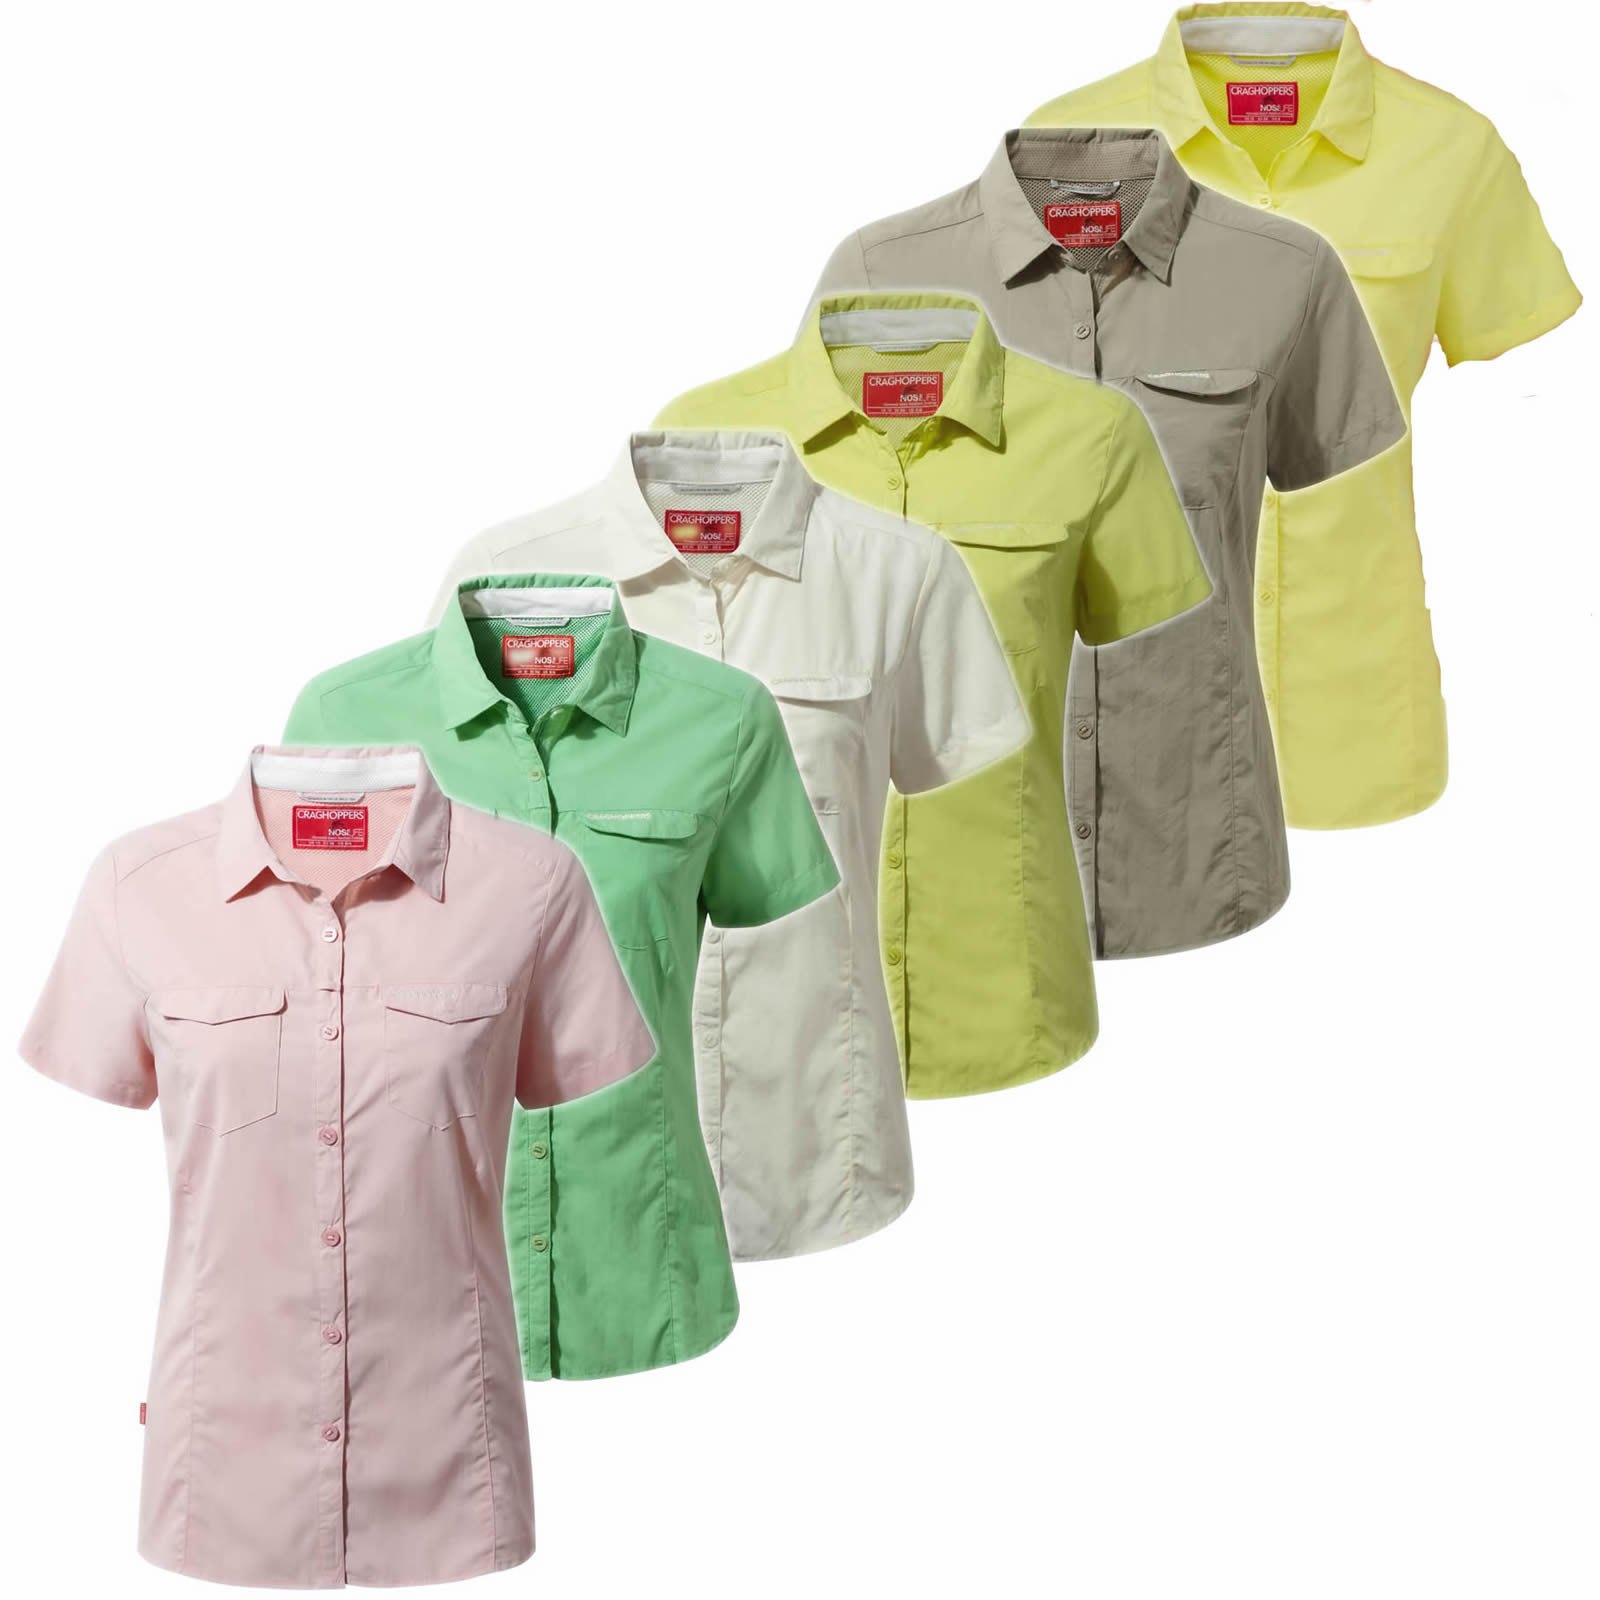 Ladies 10 Craghoppers Nosilife Anti Mosquito Insect Repellant Sun Shield Shirt 